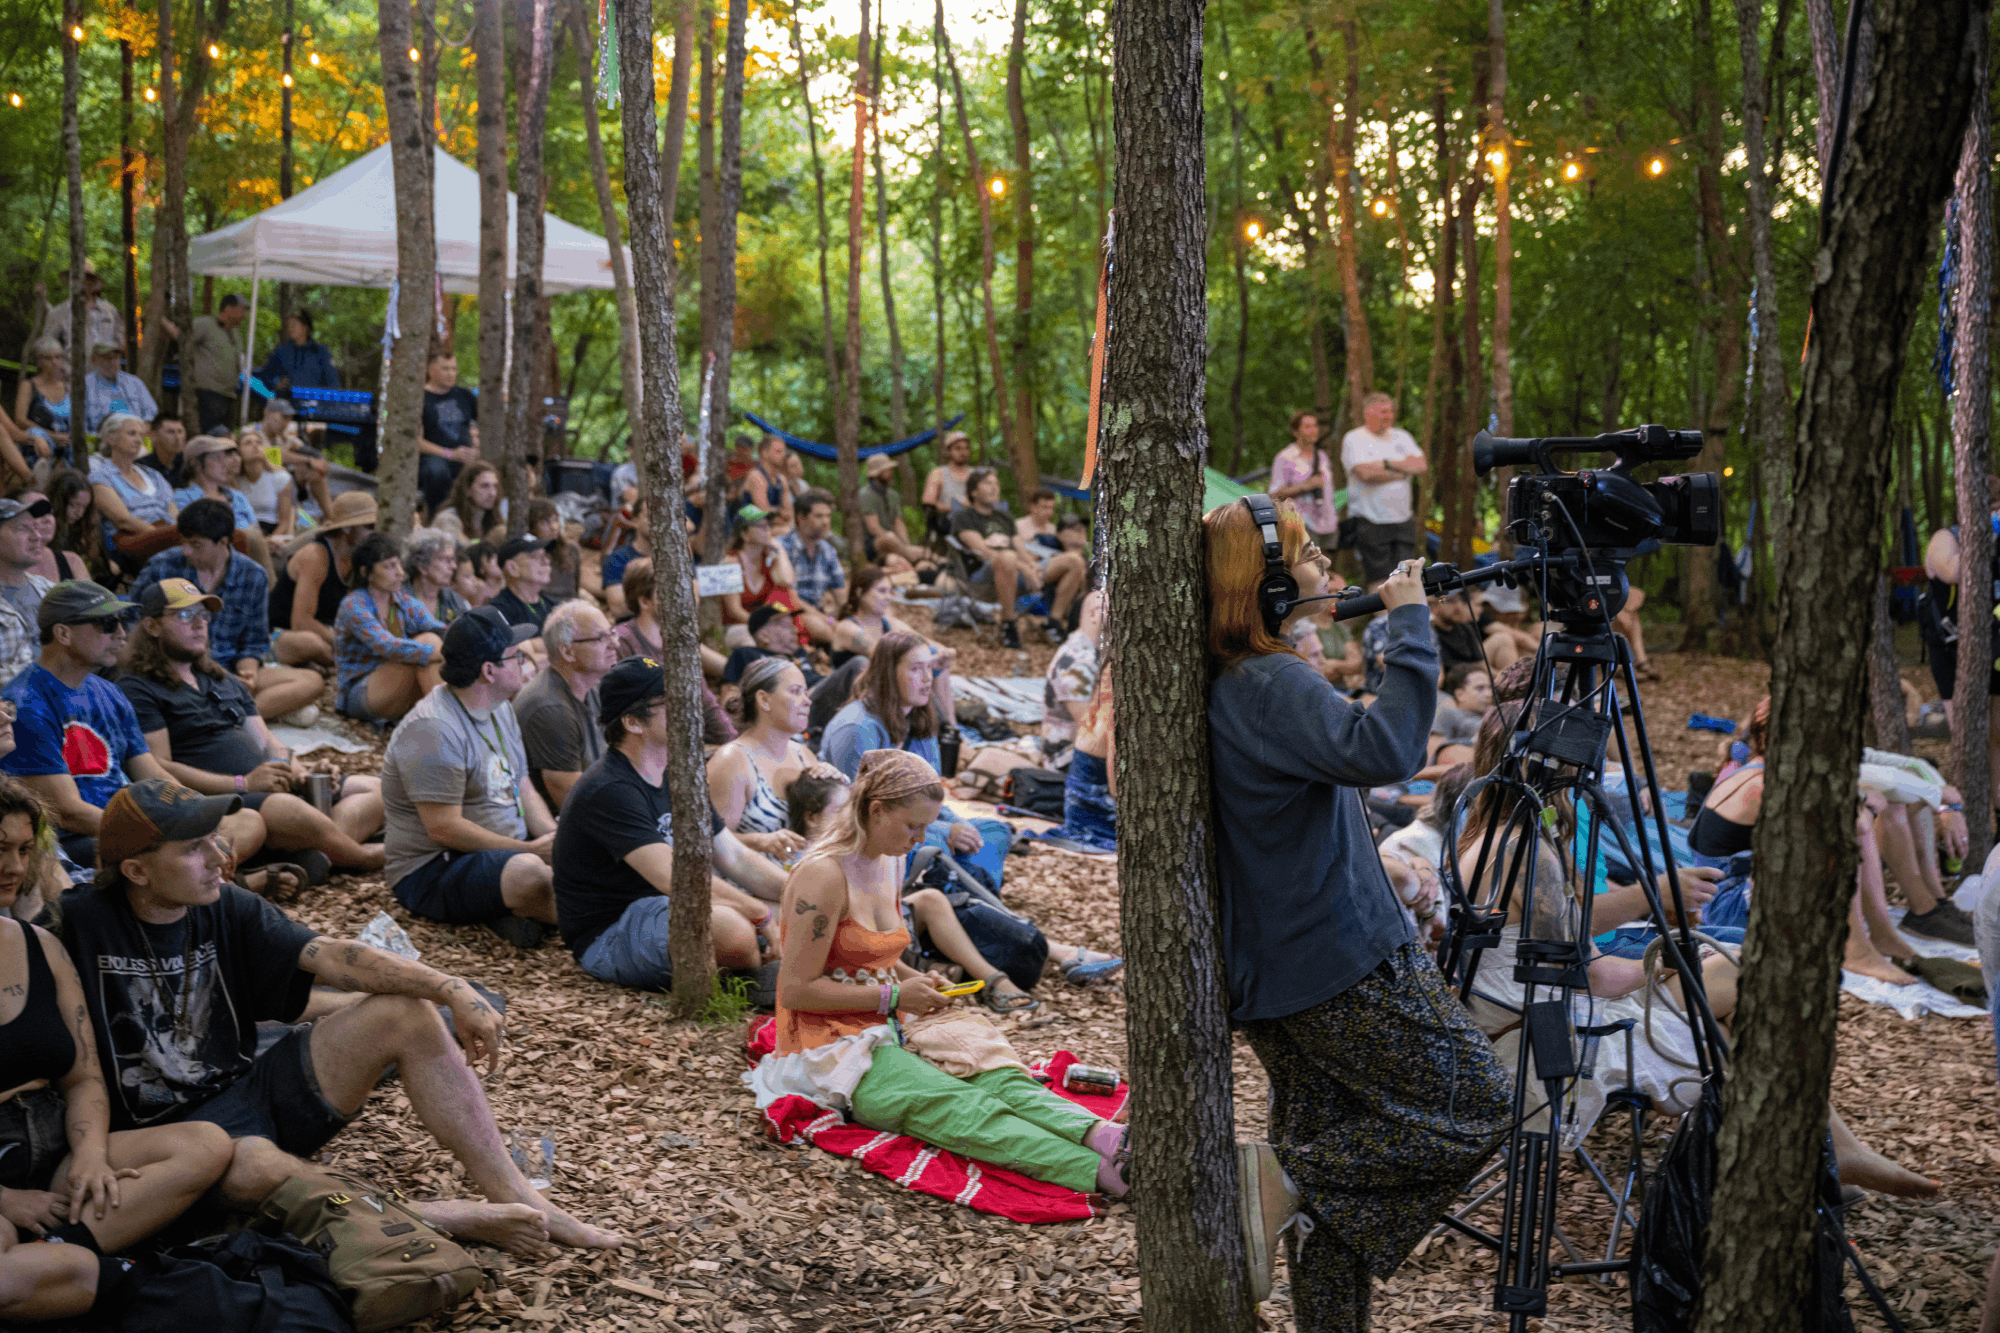 The Nelsonville Music Festival, or NMF, is an annual four-day music festival with artists performing on multiple stages and a focus on community engagement and sustainability.